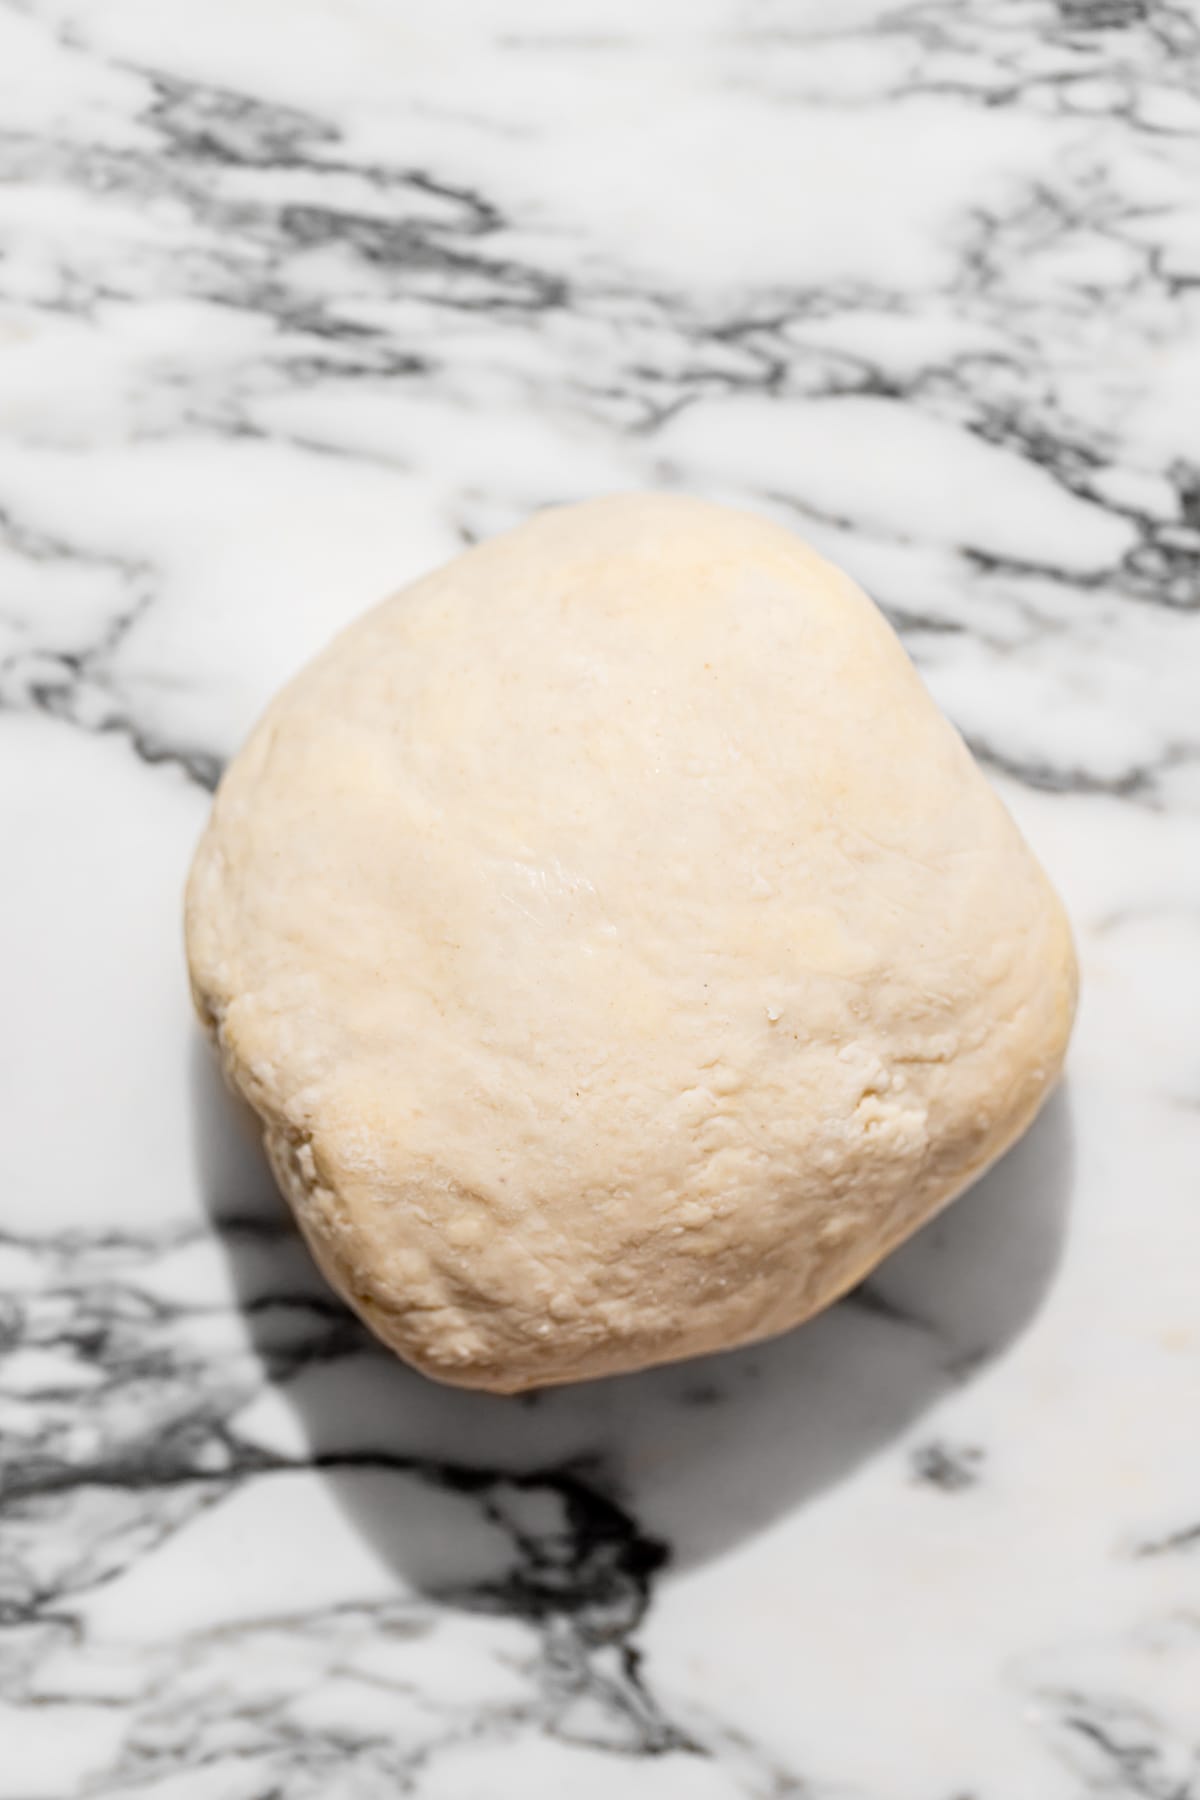 rolled and chilled ball of galette dough.